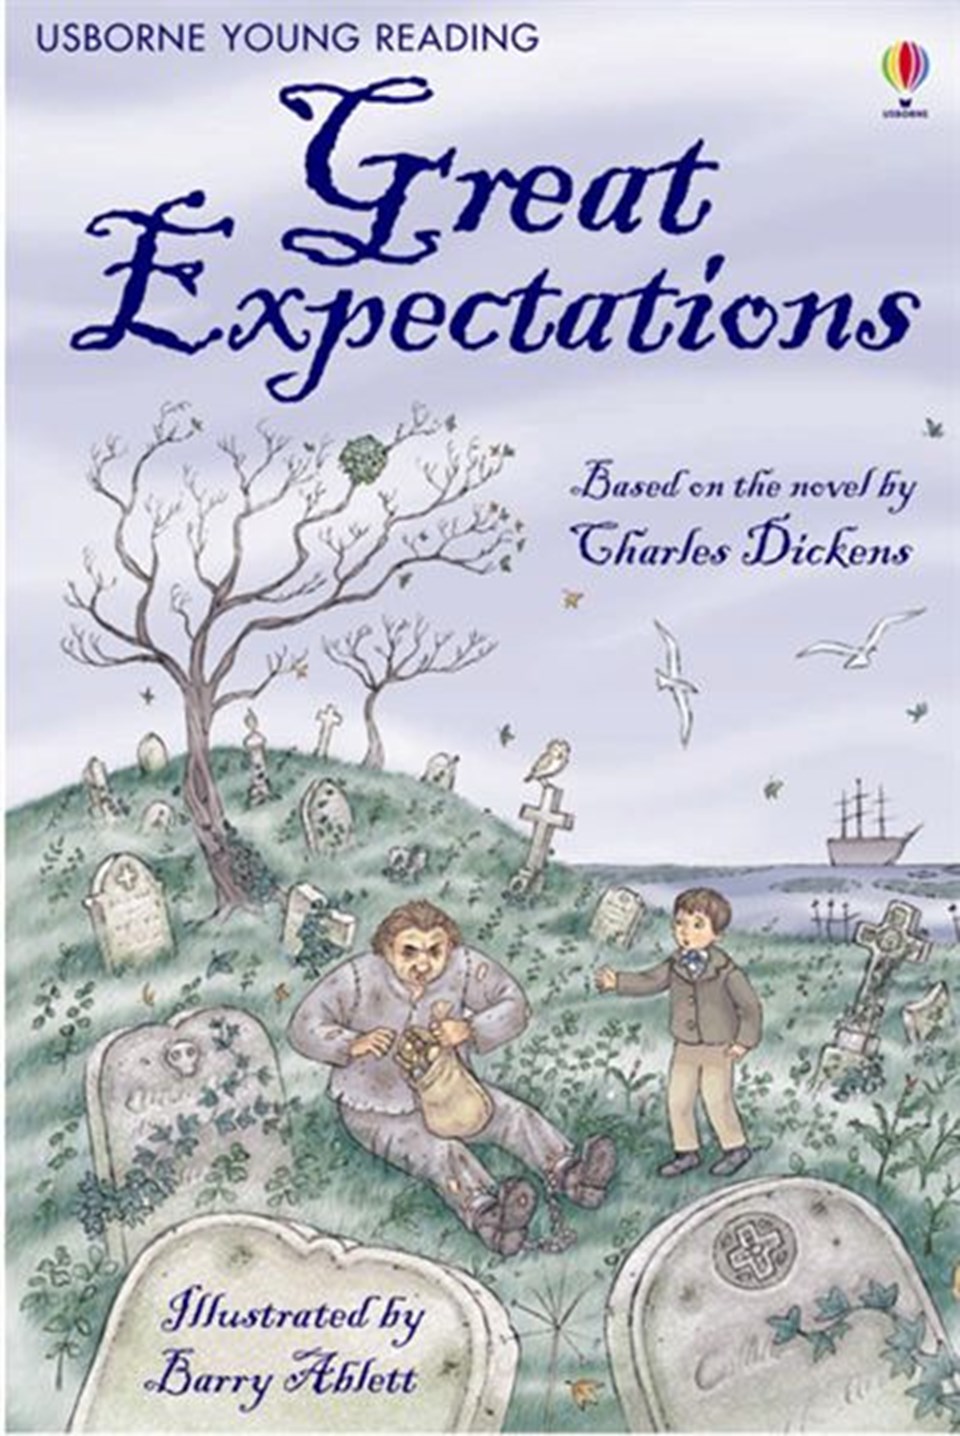 UYR 3 Great Expectations HB